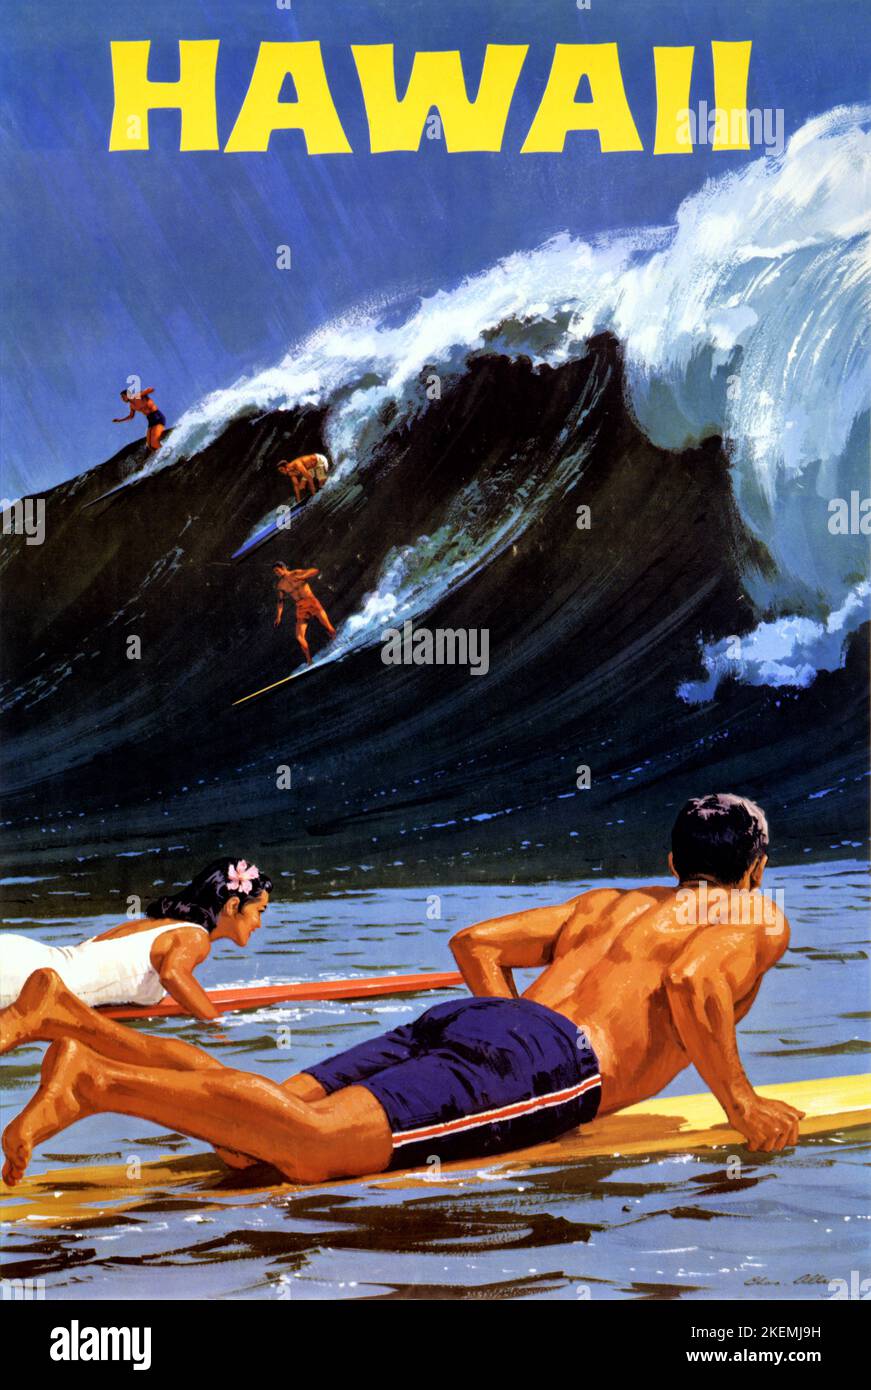 Hawaii by Chas Allen (dates unknown). Poster published in the 1950s in the US. Stock Photo